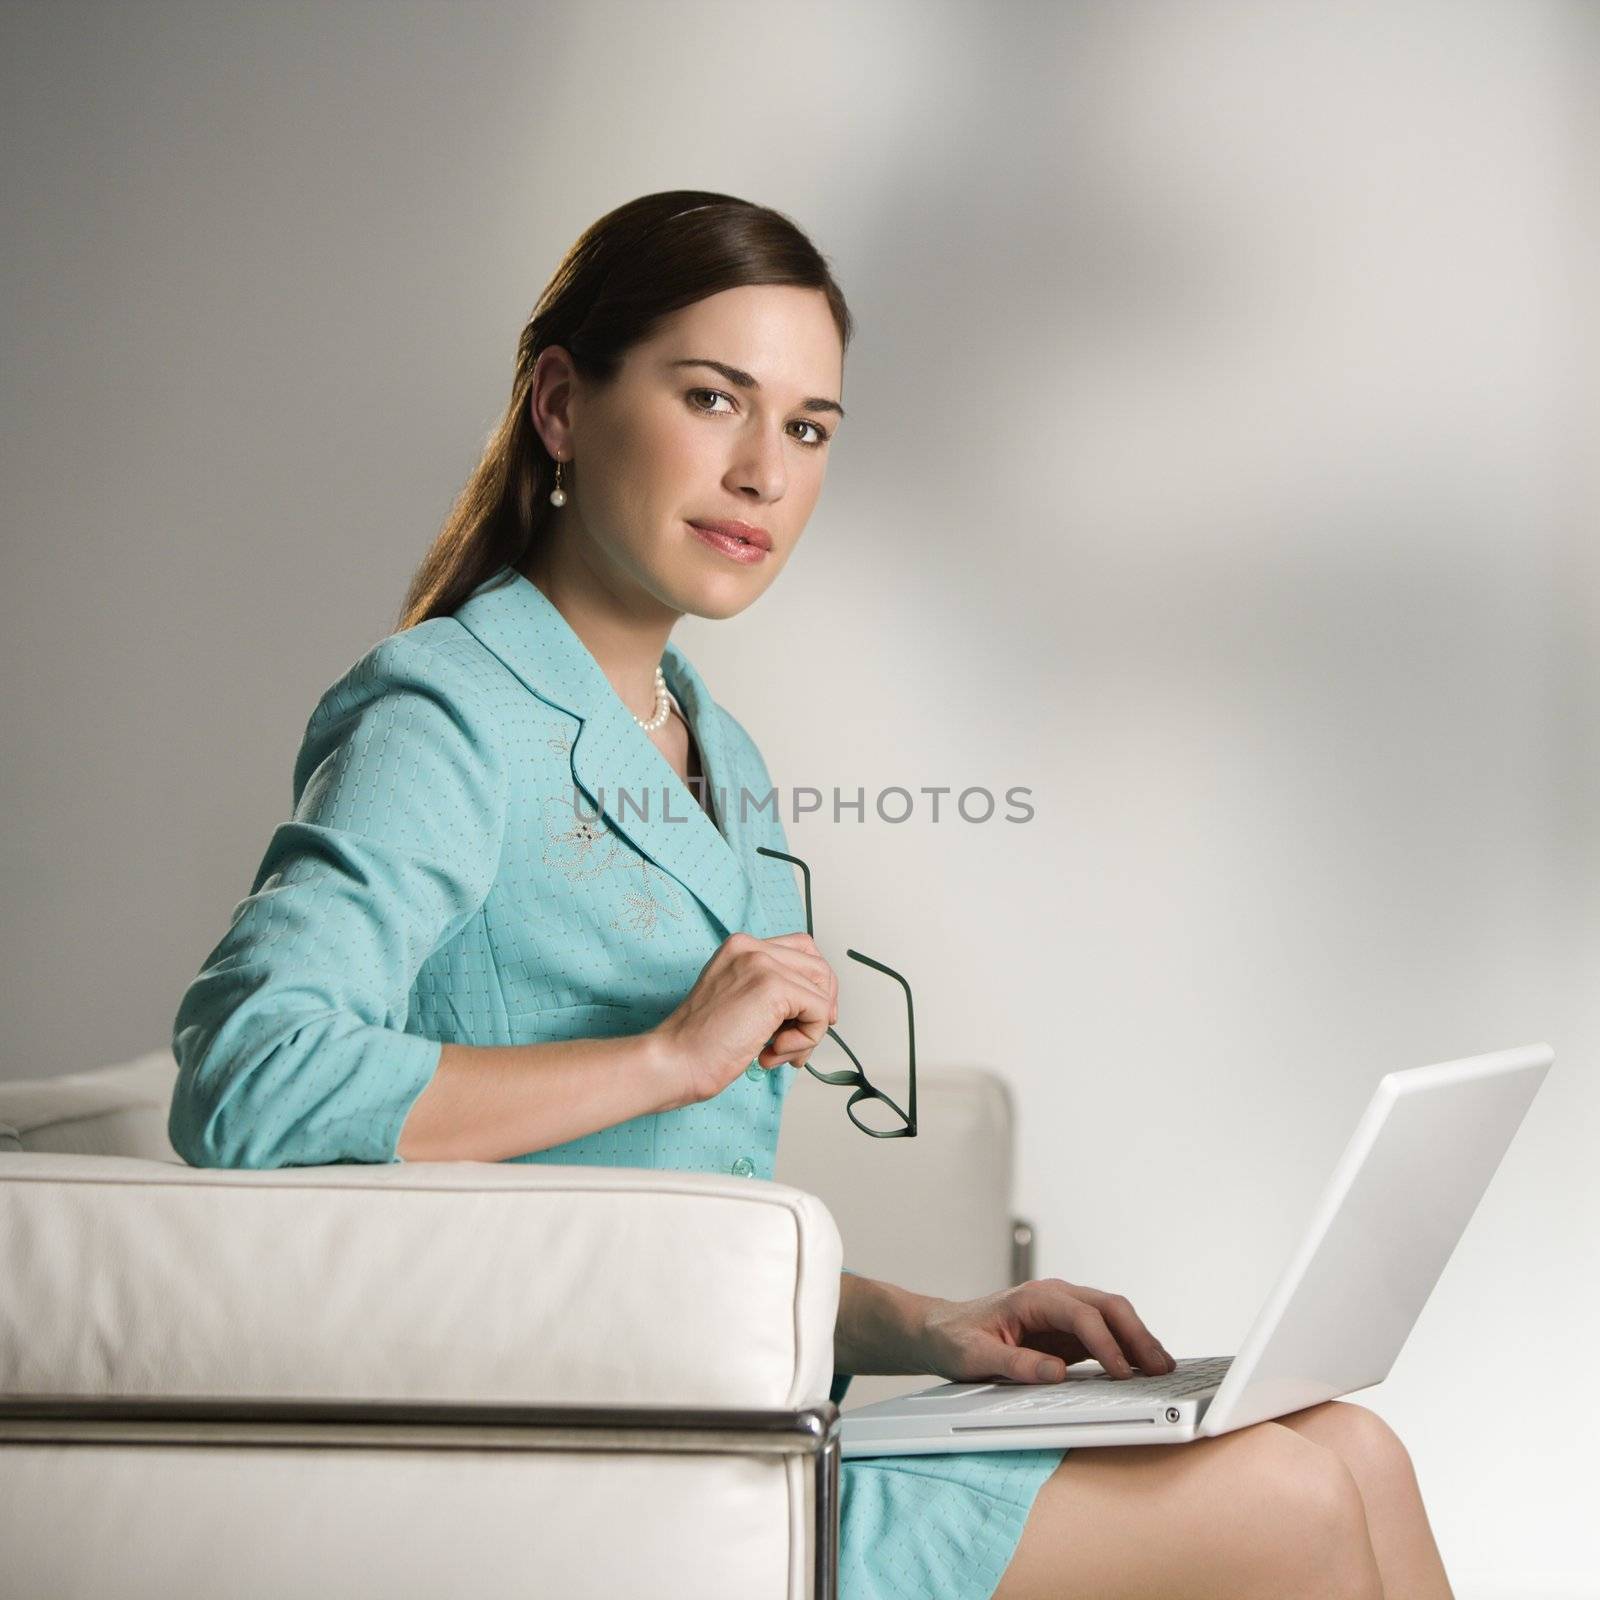 Caucasian mid adult professional business woman sitting in modern office working on laptop computer holding eyeglasses and looking at viewer.